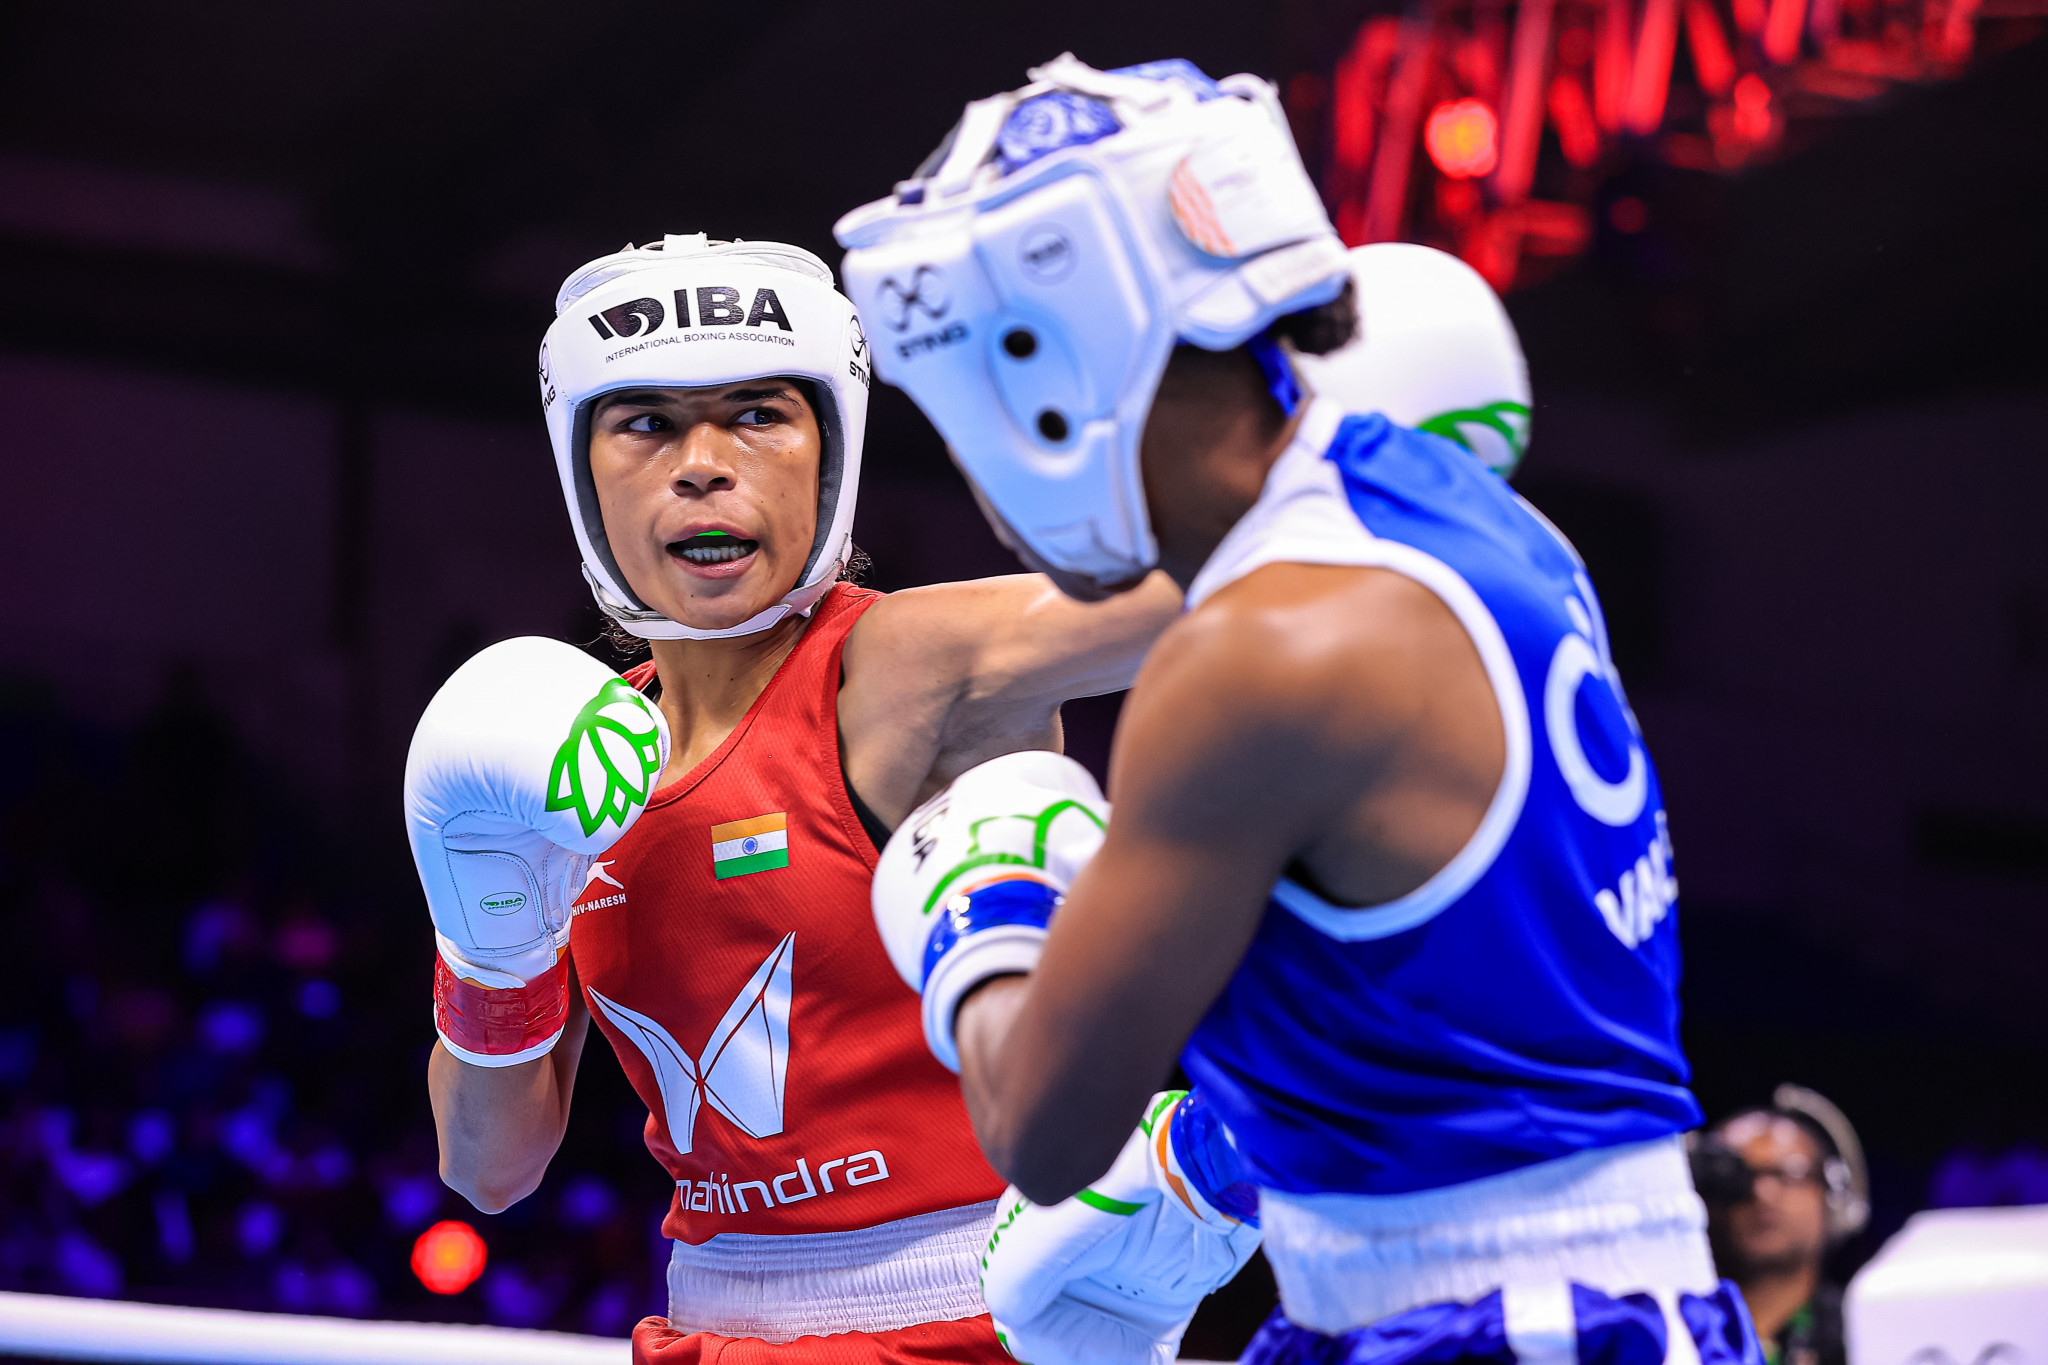 Gold medallists at the 2025 IBA Women's World Championships are set to secure $200,000 - twice the amount winners will receive at this year's event ©IBA